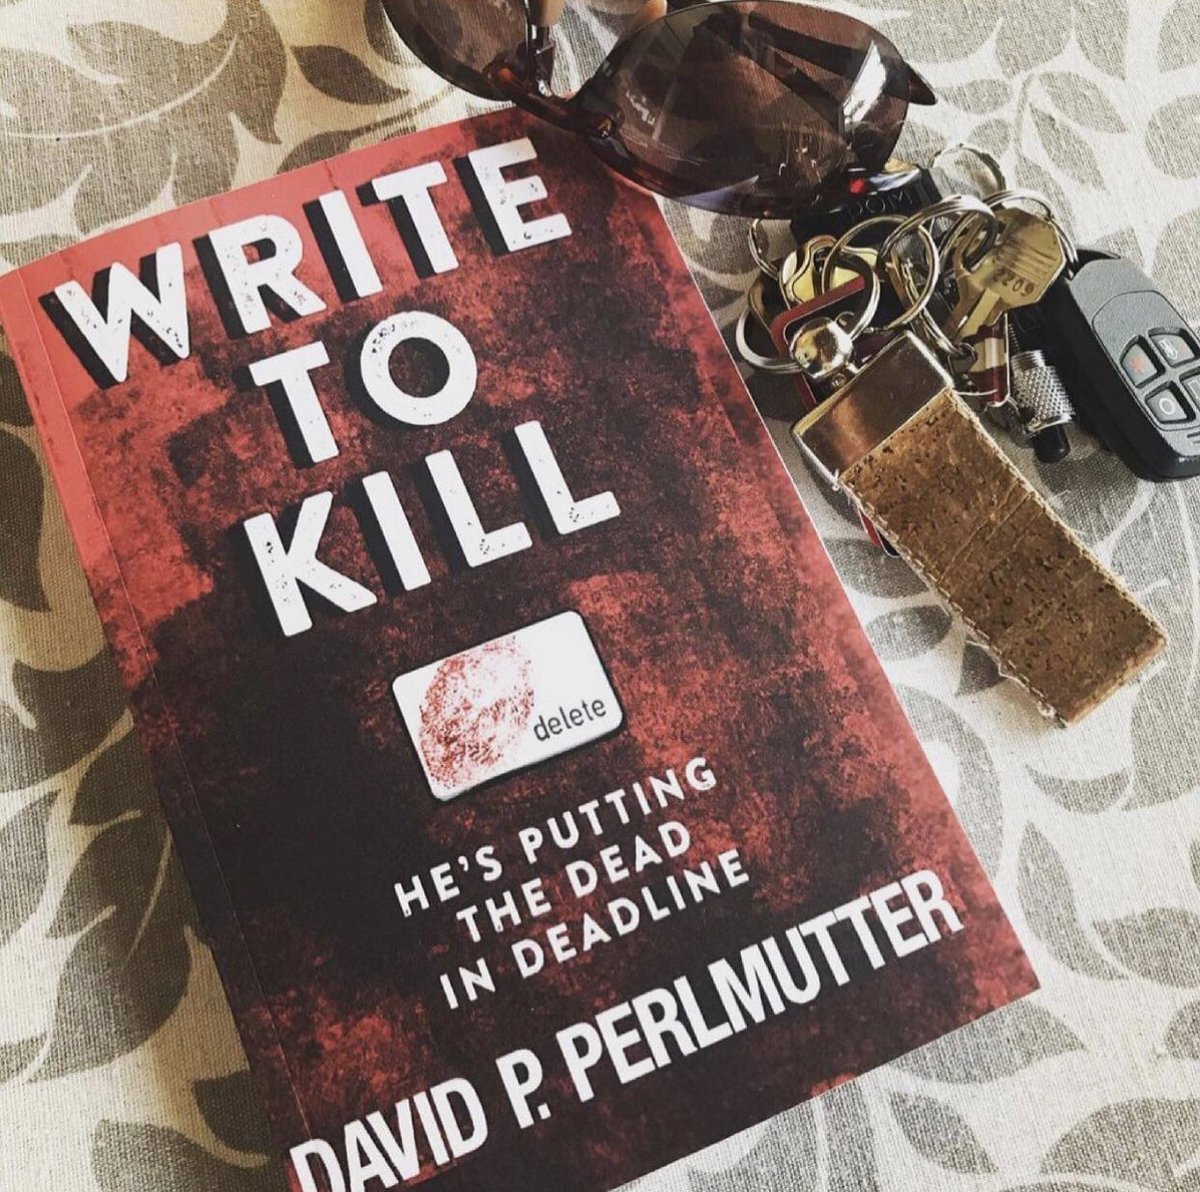 @A_DiAngelo ⭐️ ⭐️ WE ARE DETERMINED TO GIVE READERS WHAT THEY WANT - A TV SERIES OF WRITE TO KILL ⭐️⭐️

The @Kickstarter funding campaign for filming of the #TVPilot for #WriteToKill is LIVE, starring an INTERNATIONAL CAST - If you want to be involved as a producer, actor, or wish to back…